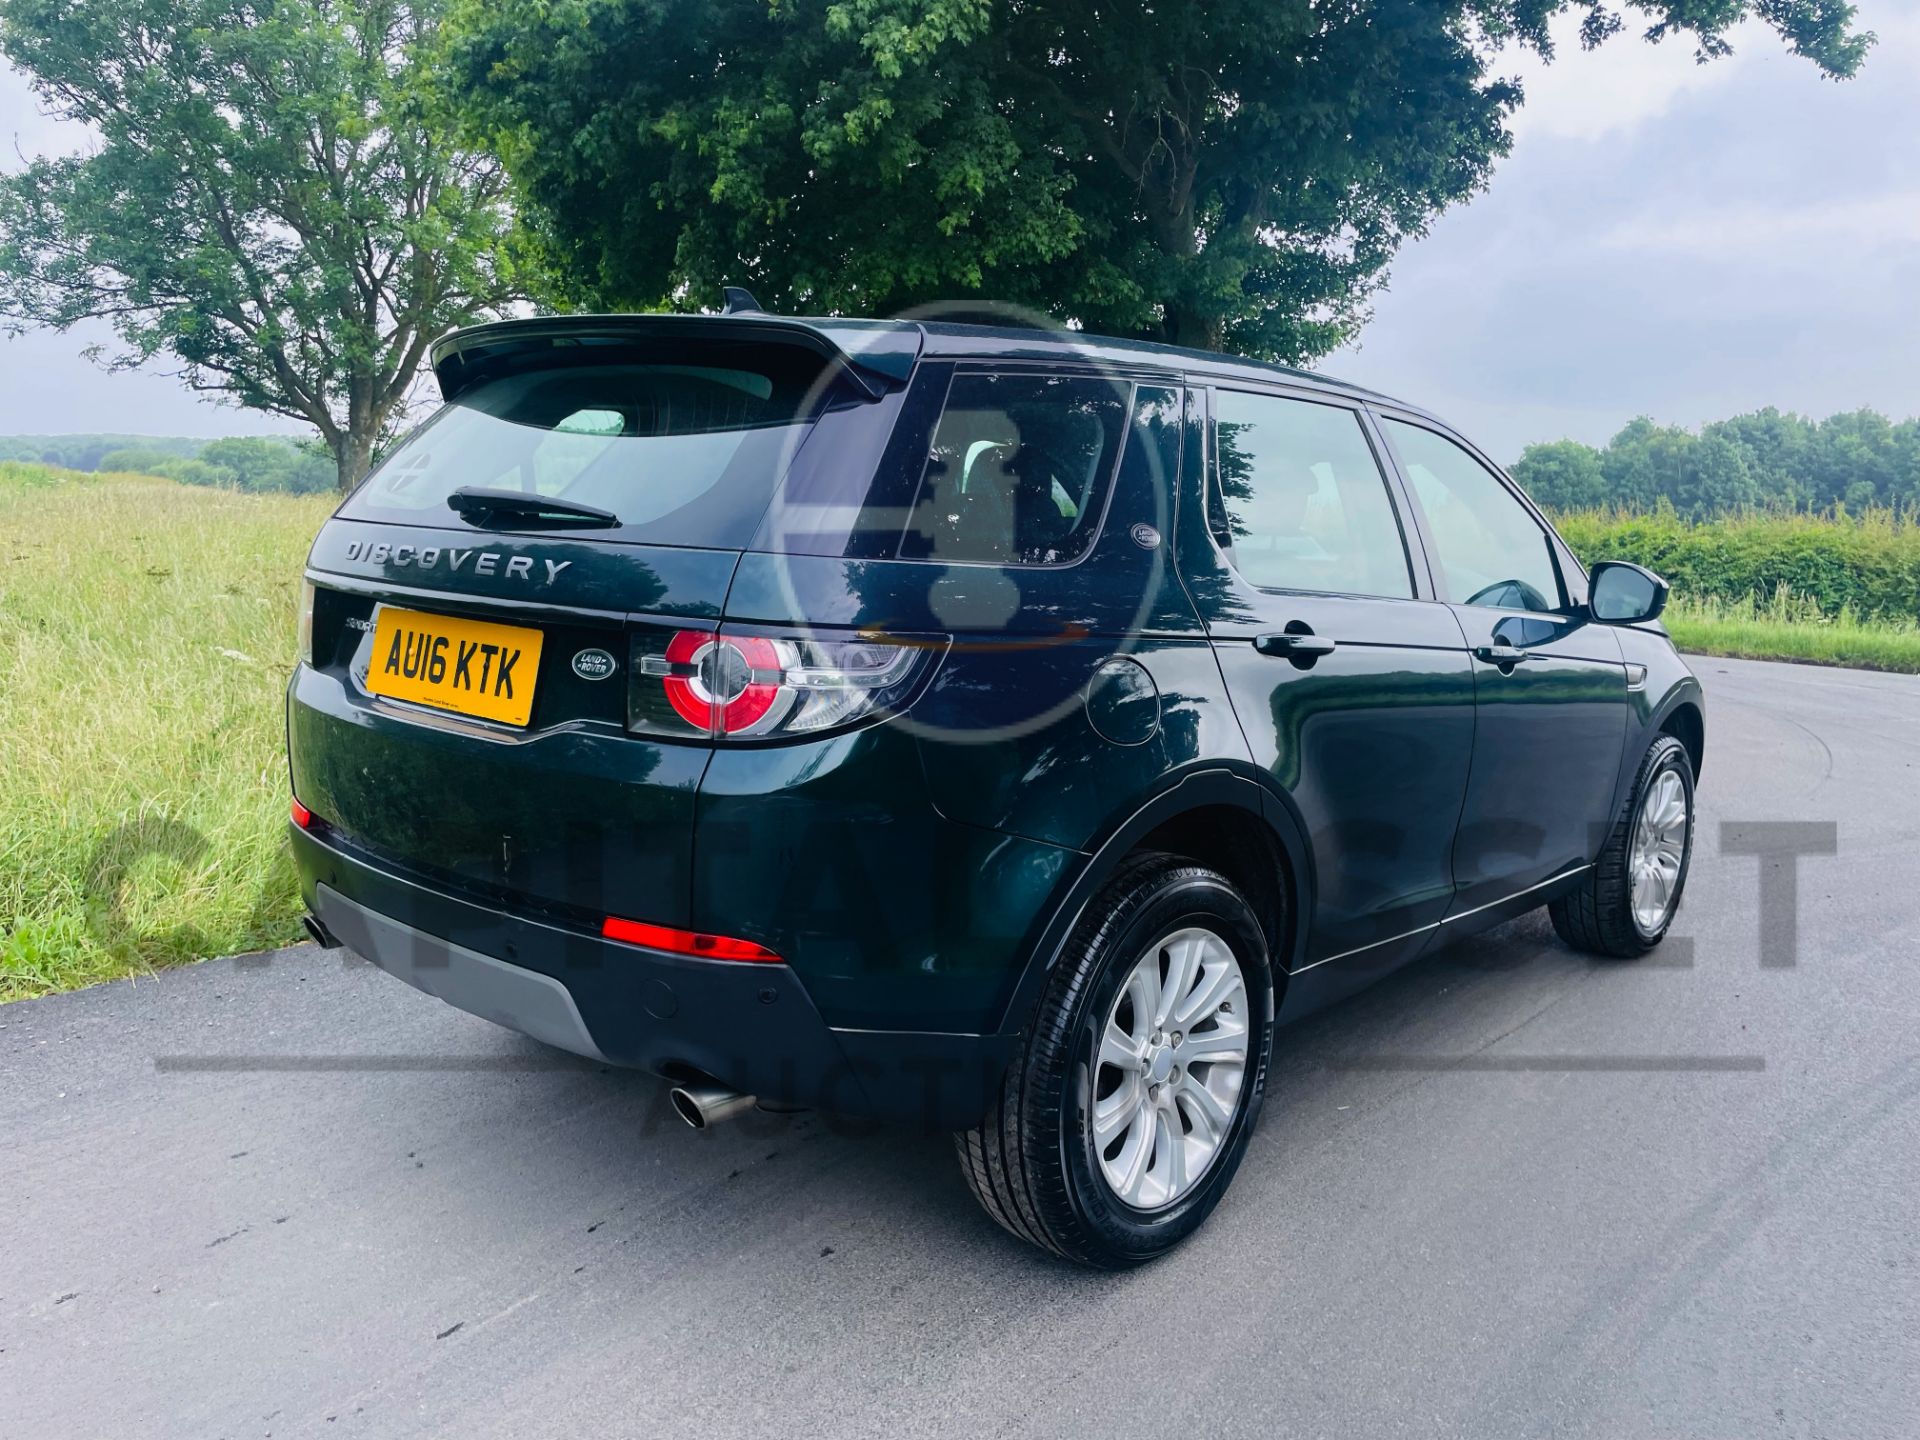 LAND ROVER DISCOVERY SPORT *SE TECH* 7 SEATER SUV (2016) 2.0 TD4 - AUTO *LEATHER & NAV* (NO VAT) - Image 12 of 54